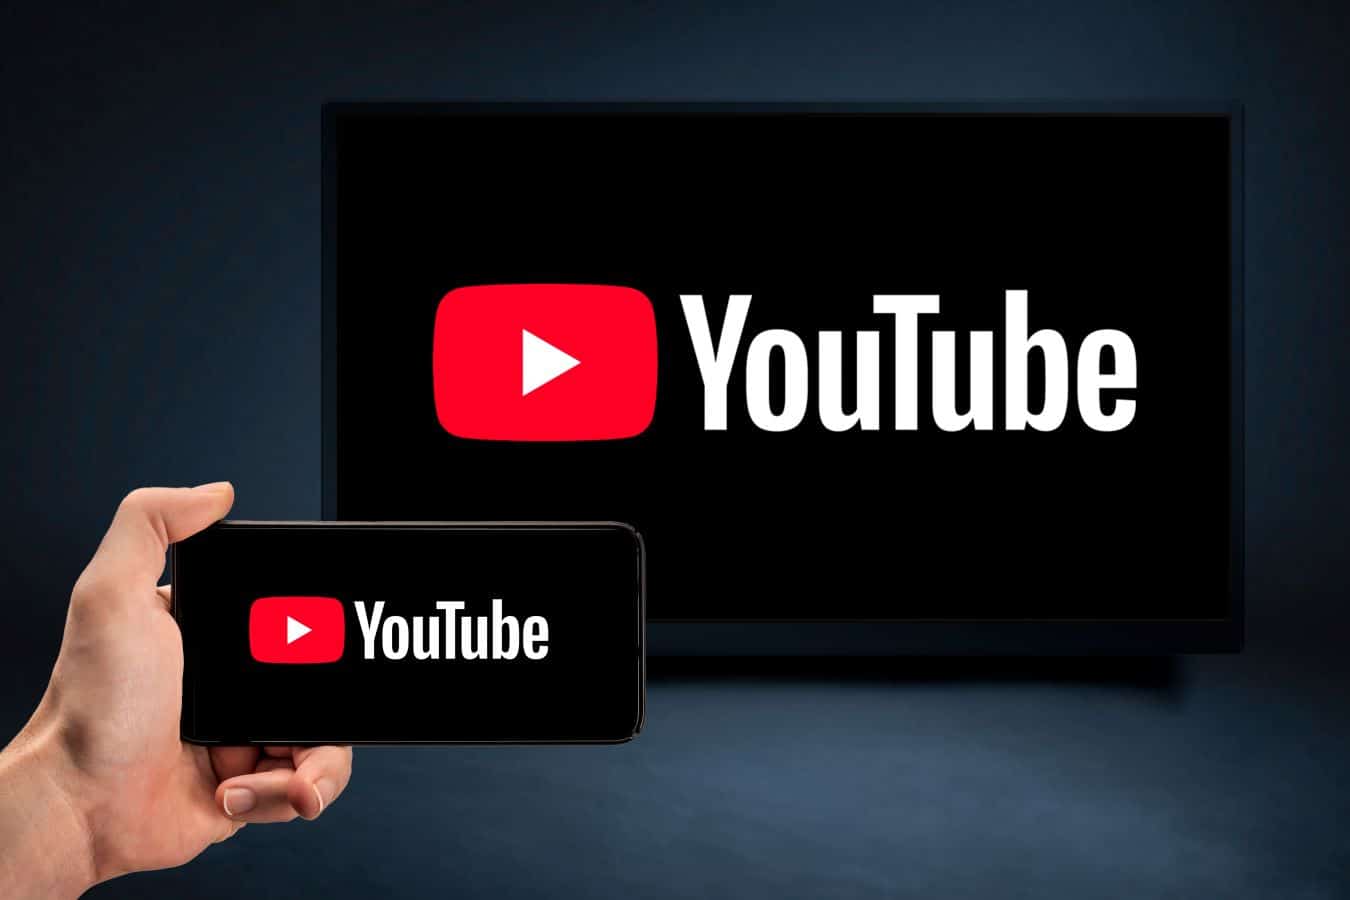 YouTube has removed 1.2 million videos in Bangladesh.